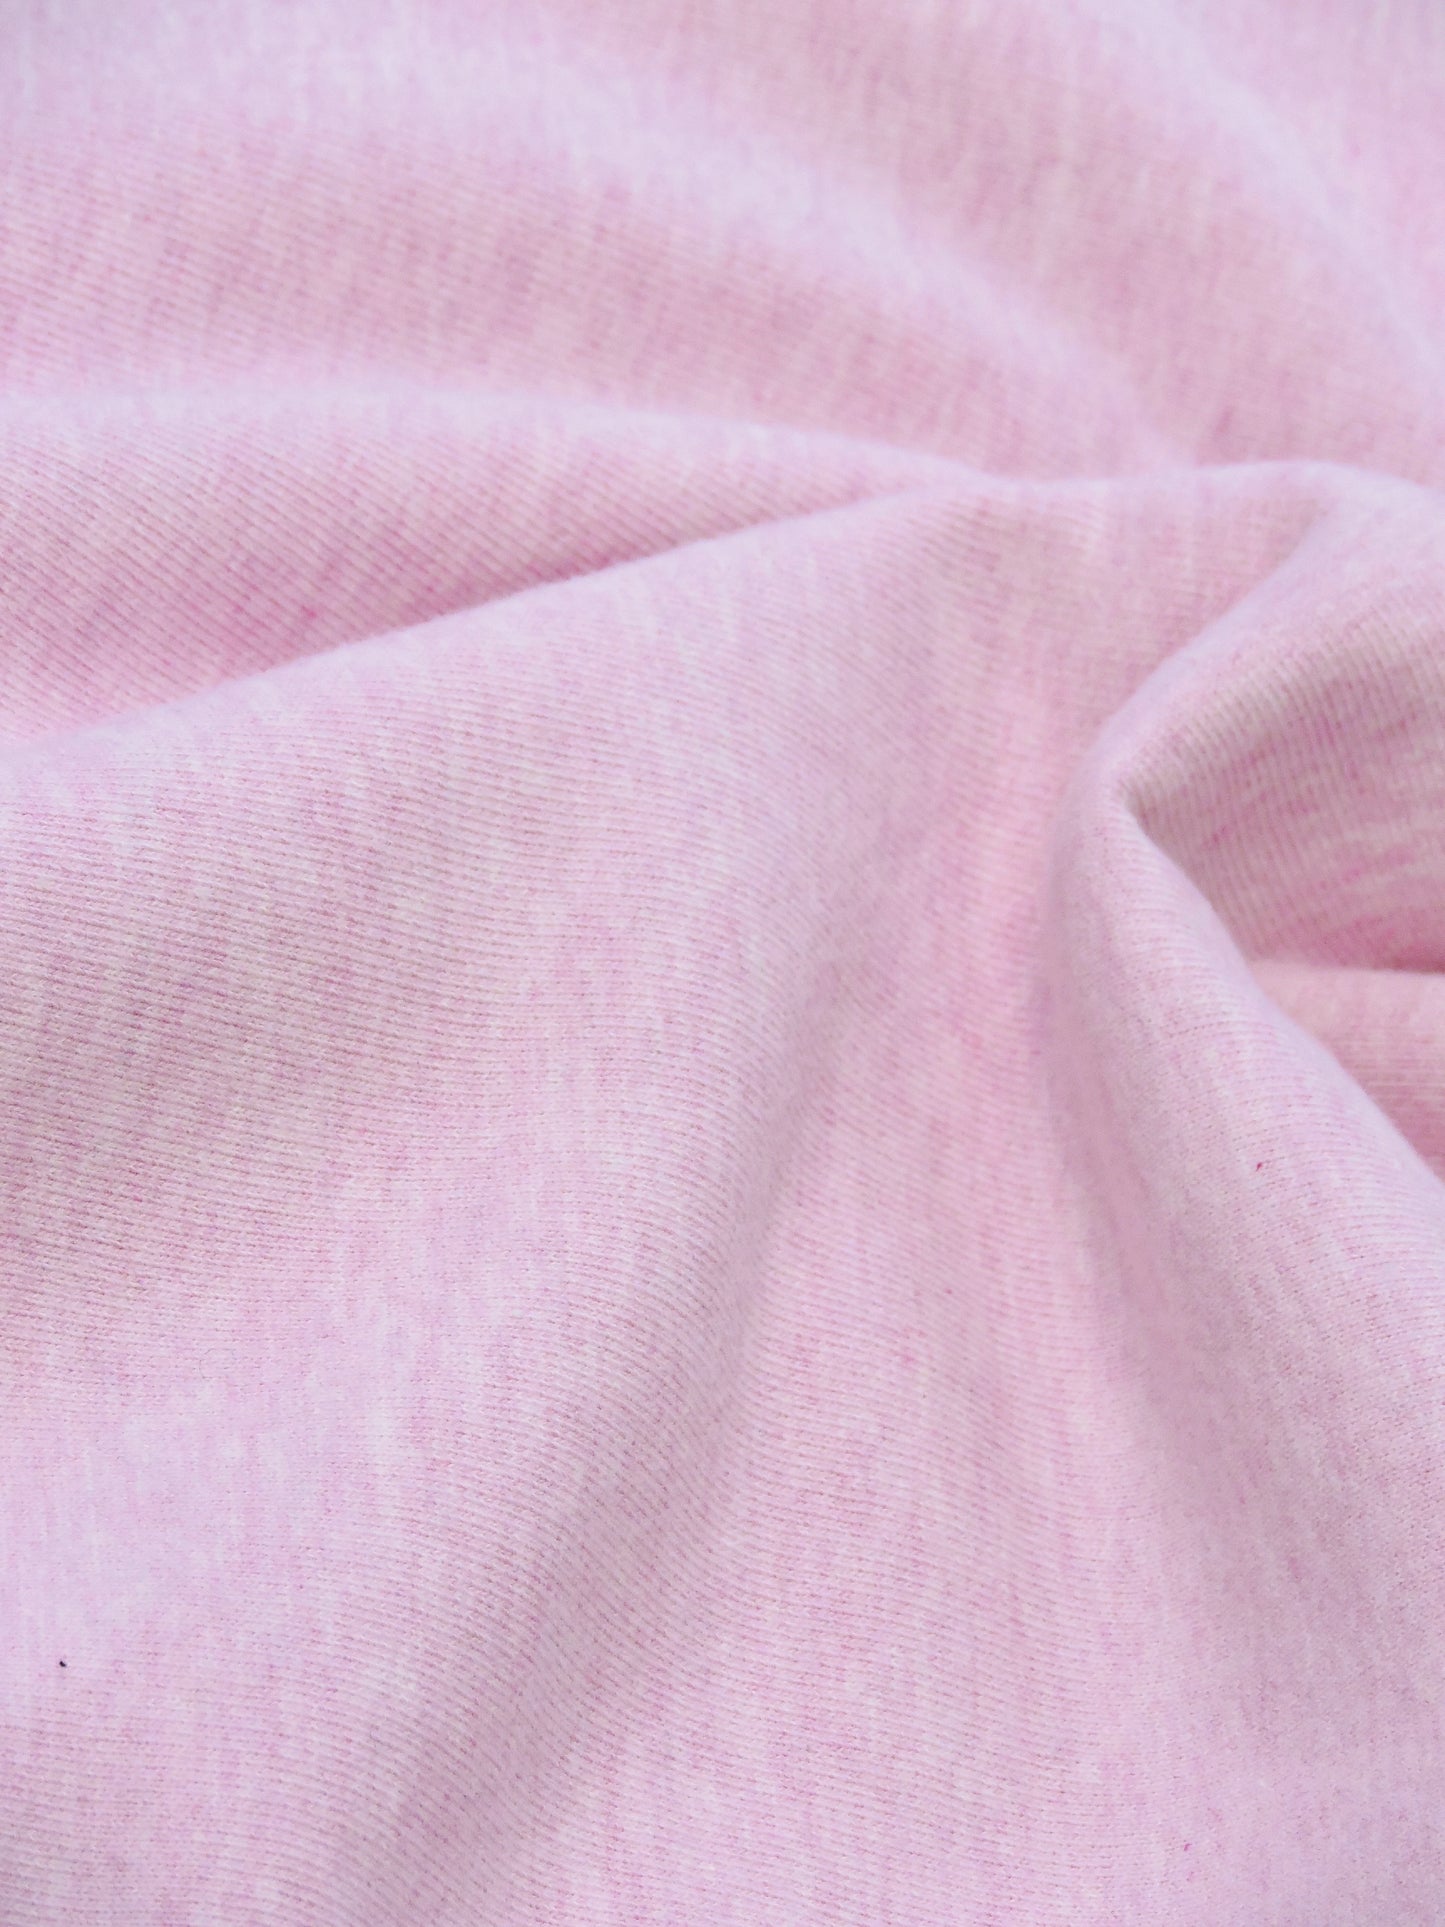 Close up of the soft pink fabric